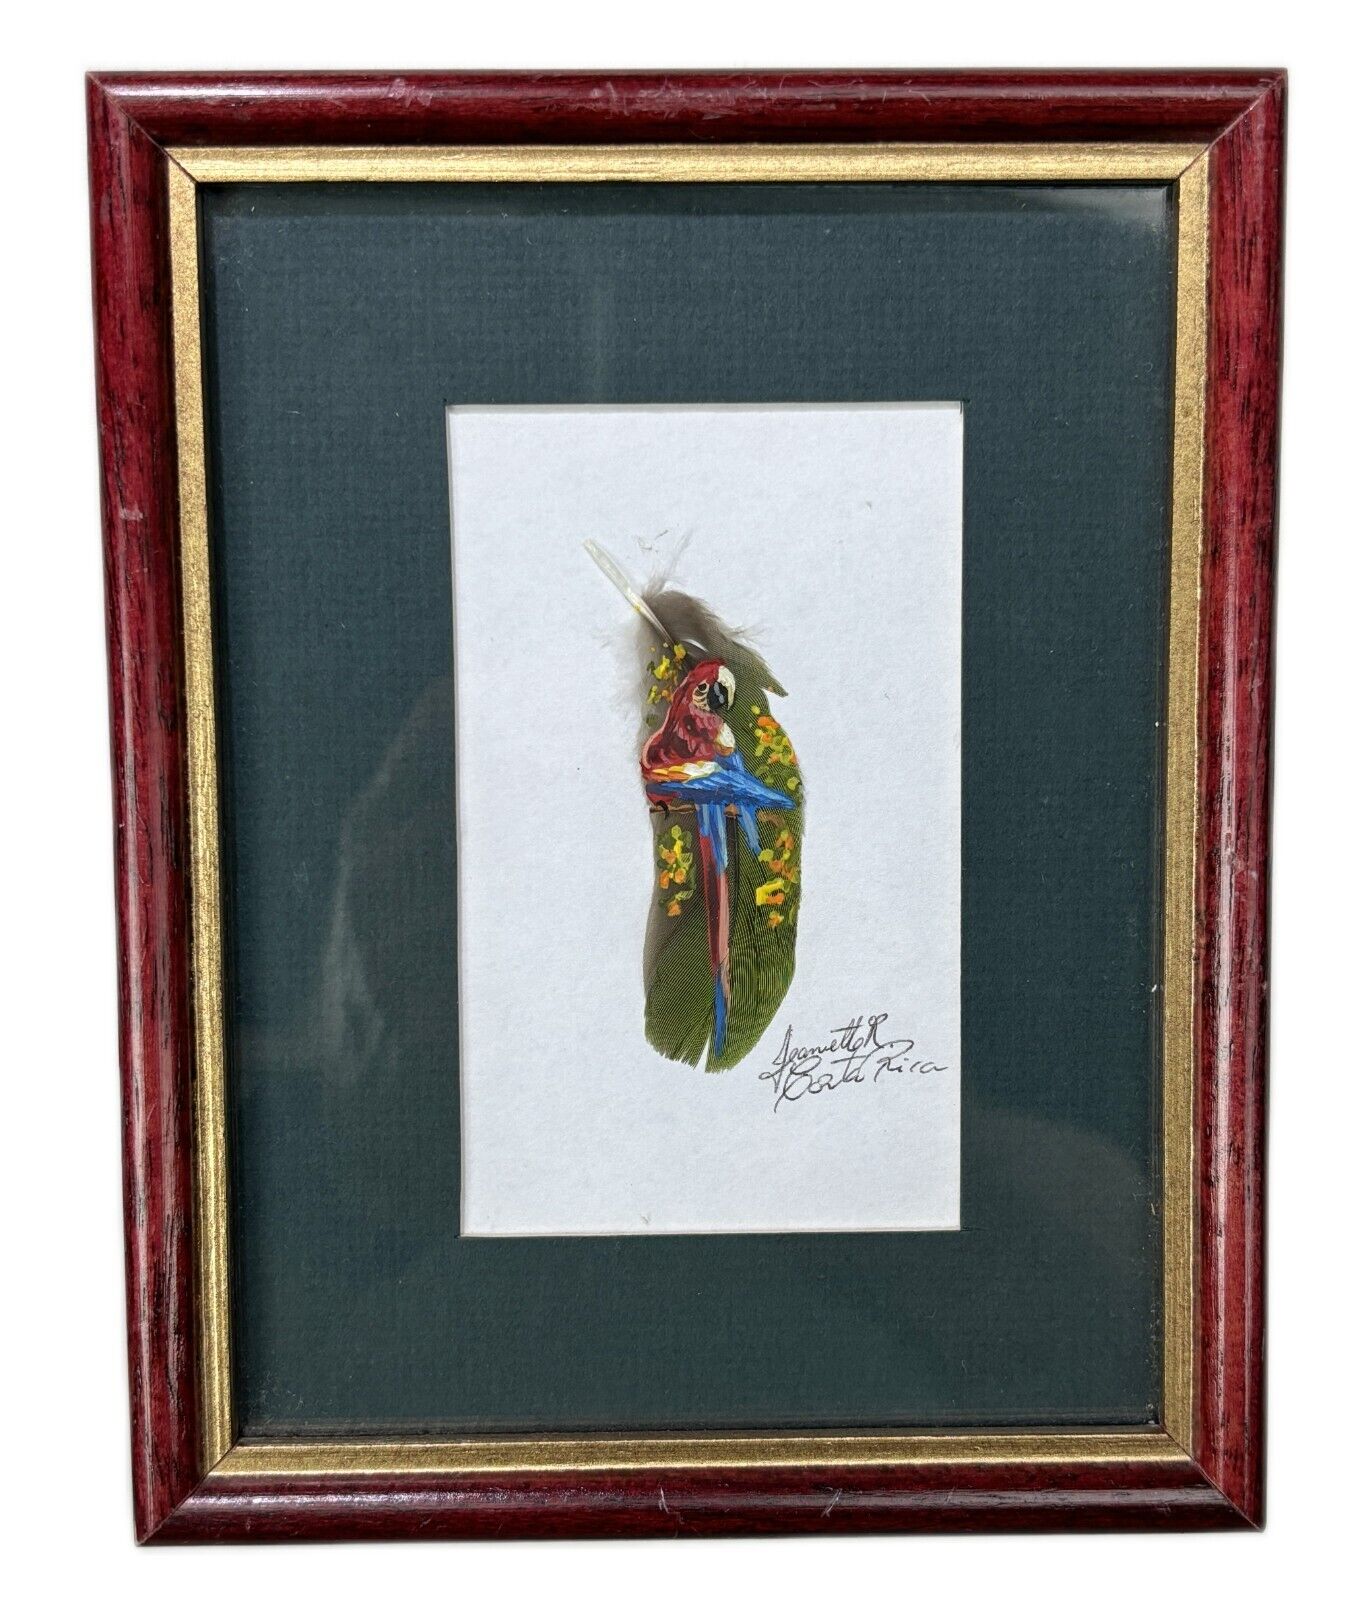 Painted Feather Parrot Bird Framed Art Picture Costa Rica Jeanette R.